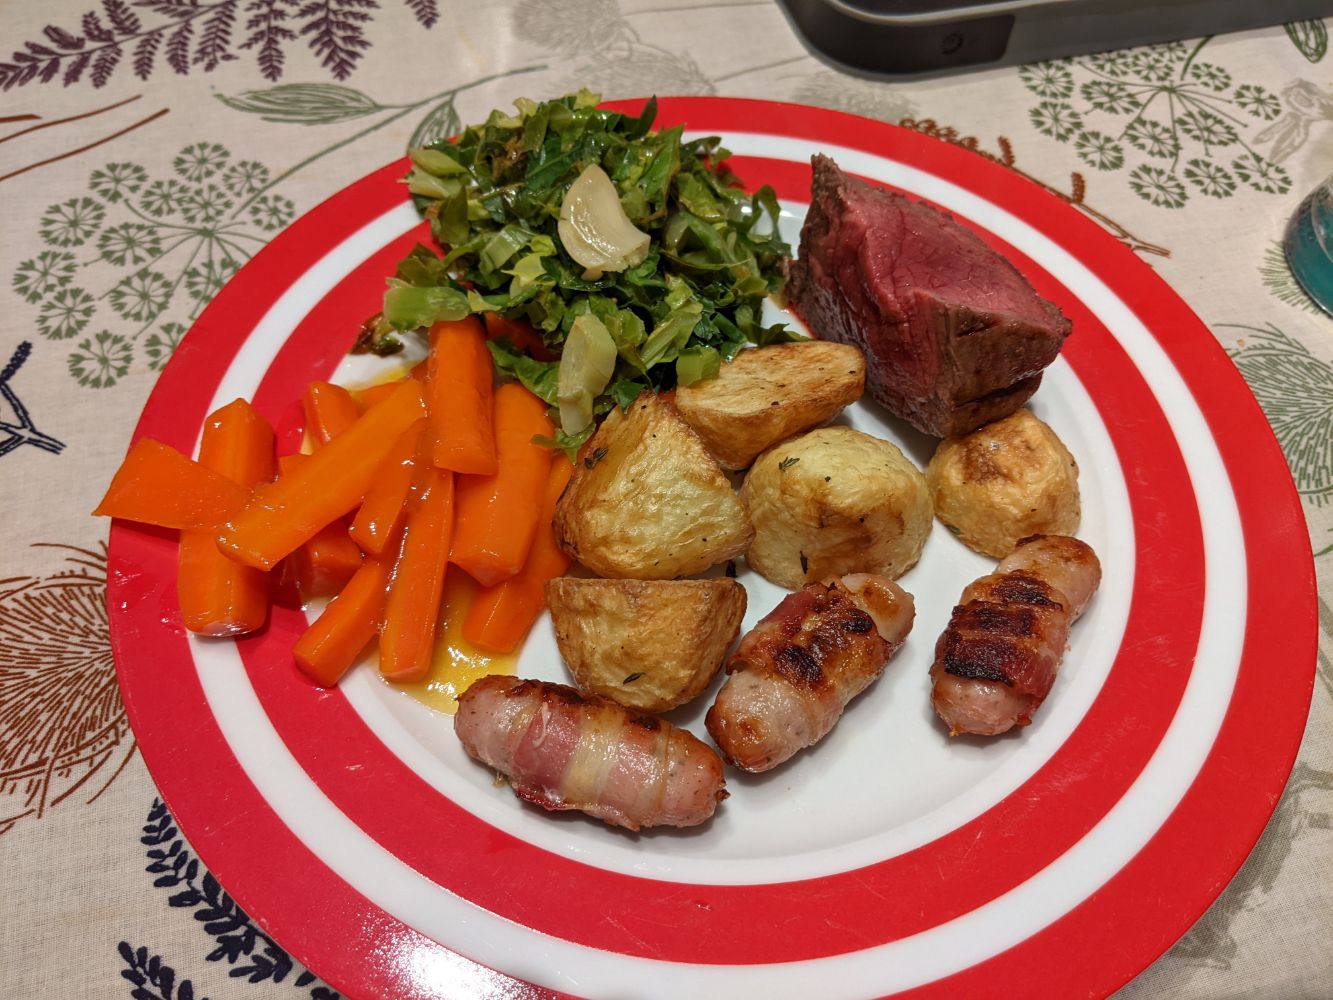 A beef roast with all the trimmings on a plate - marmalade carrots, with a bit of extra marmalade gravy sauce, roast potatoes, spring greens with olive oil and garlic, pigs in blankets, and roast beef that was very rare in the middle 